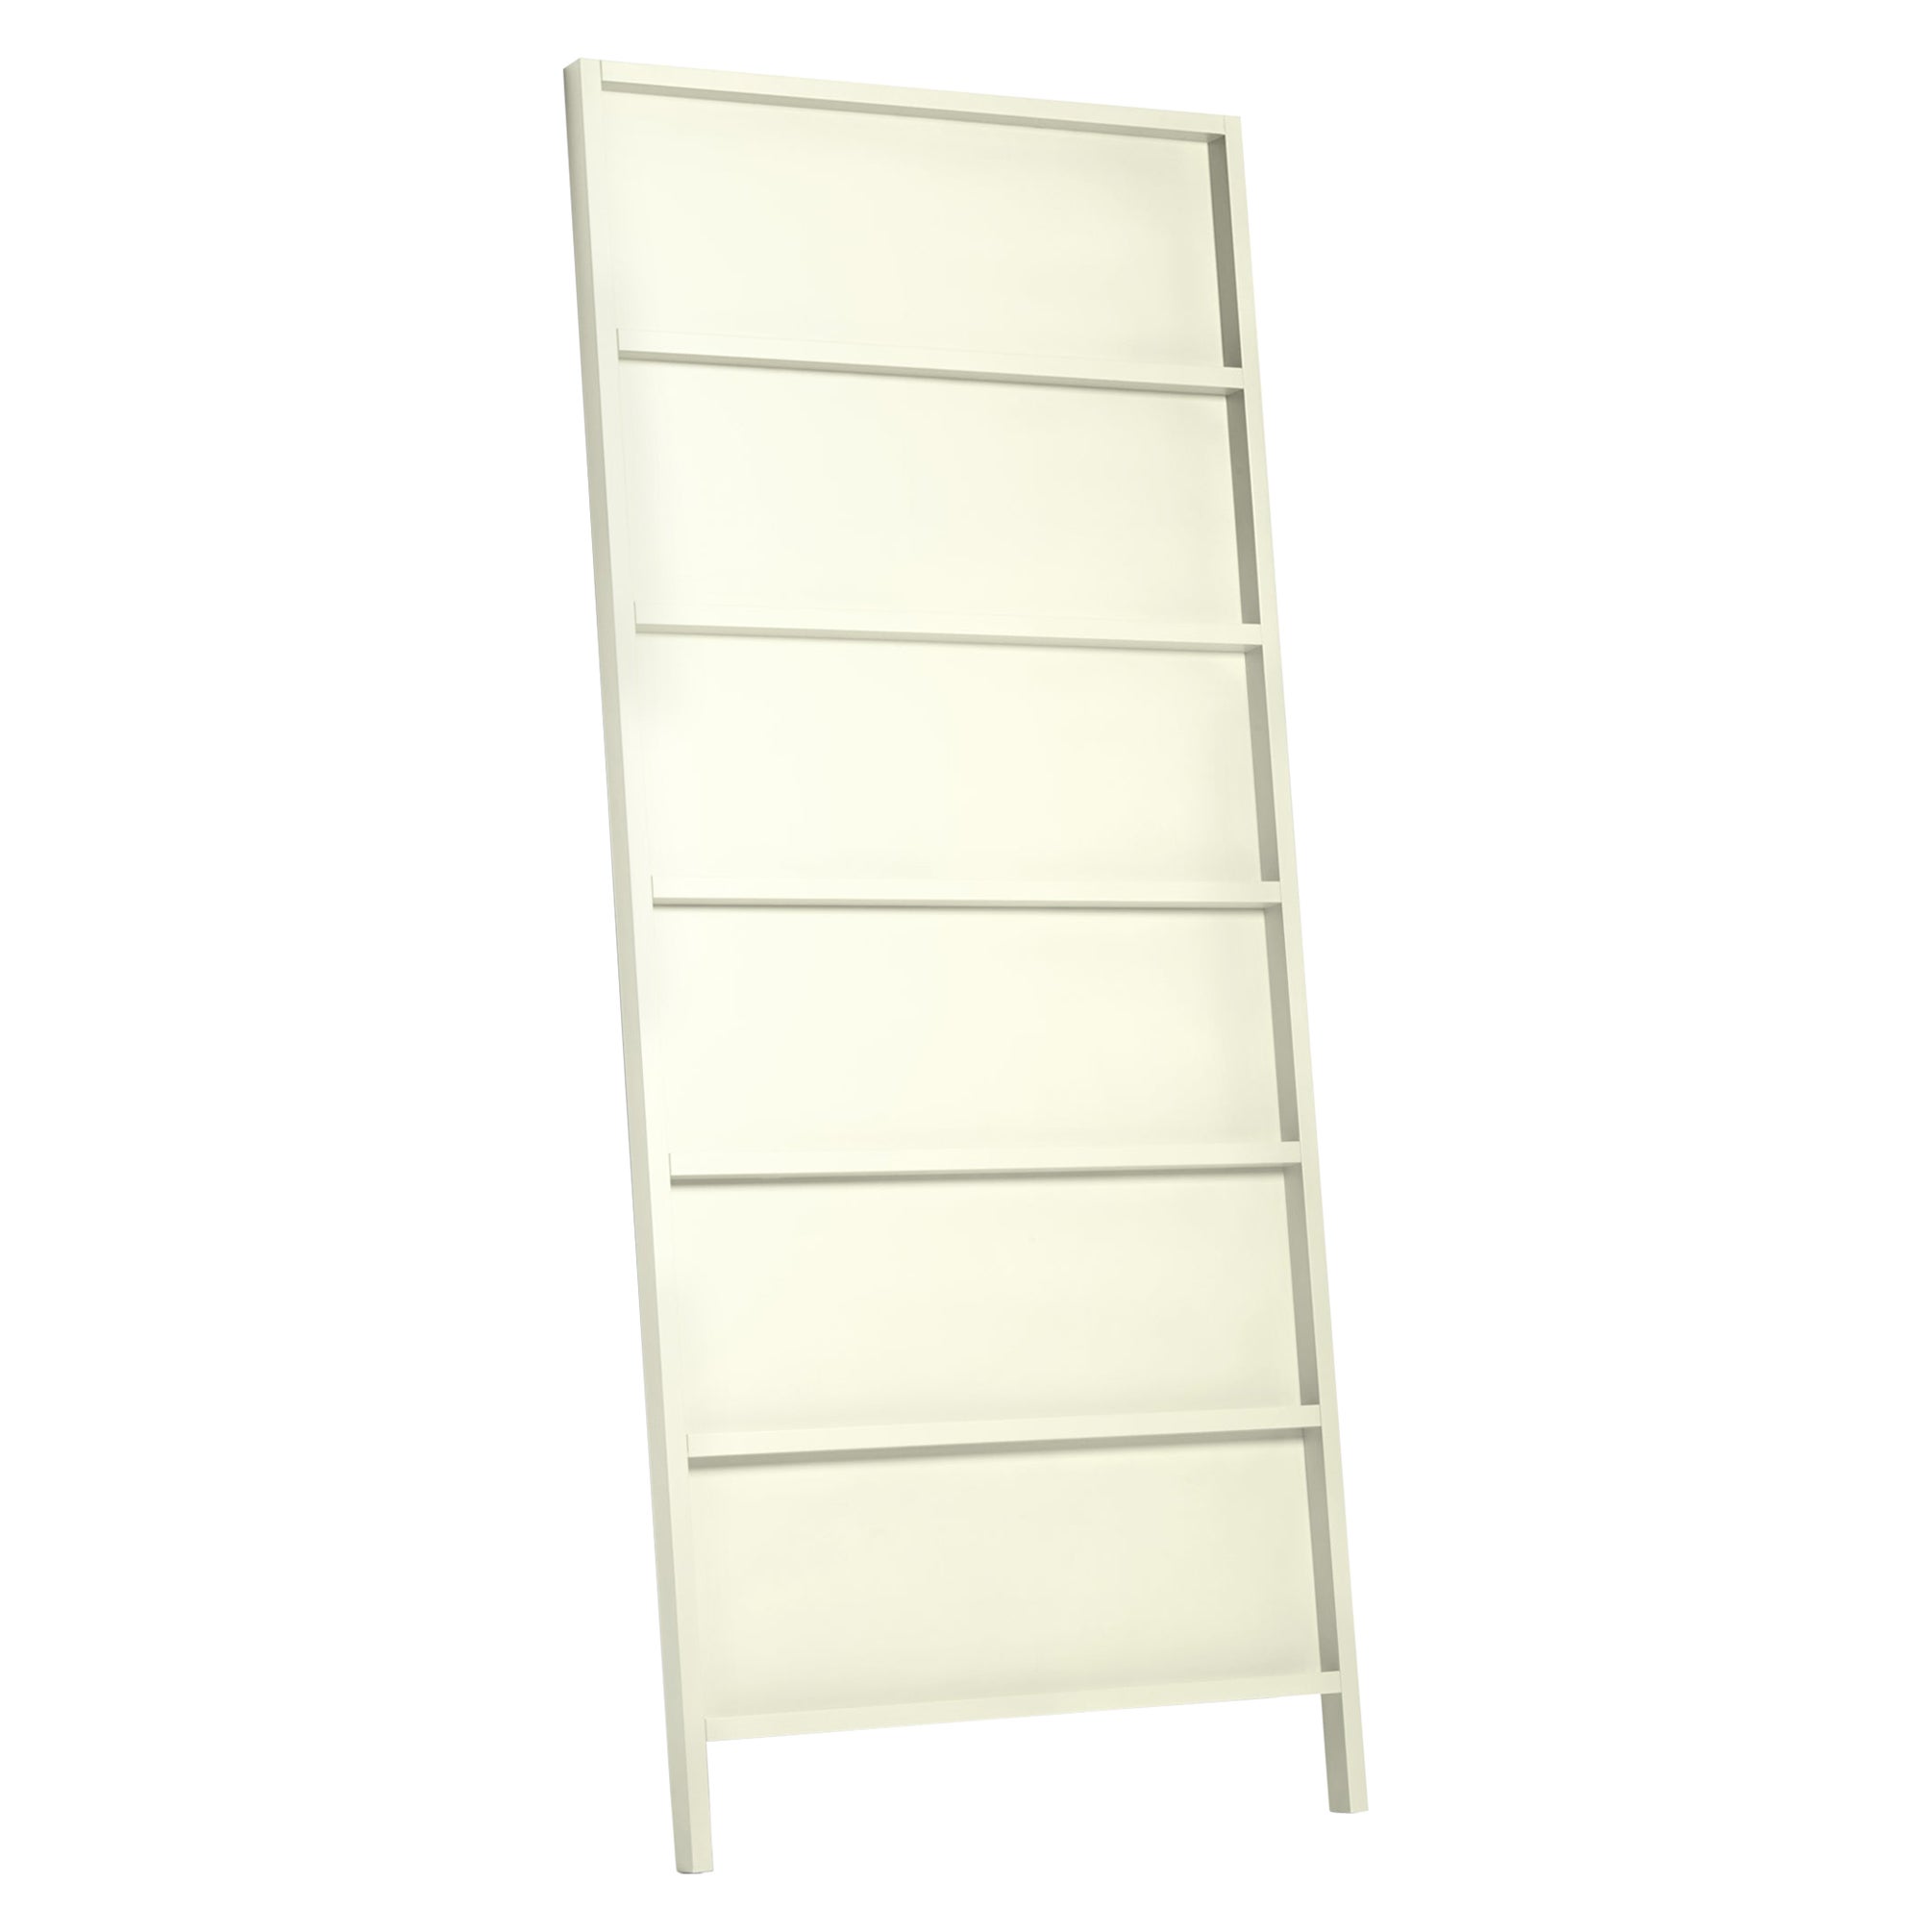 Moooi Oblique Big Cupboard/Wall Shelf in Oyster White Lacquered Beech For Sale